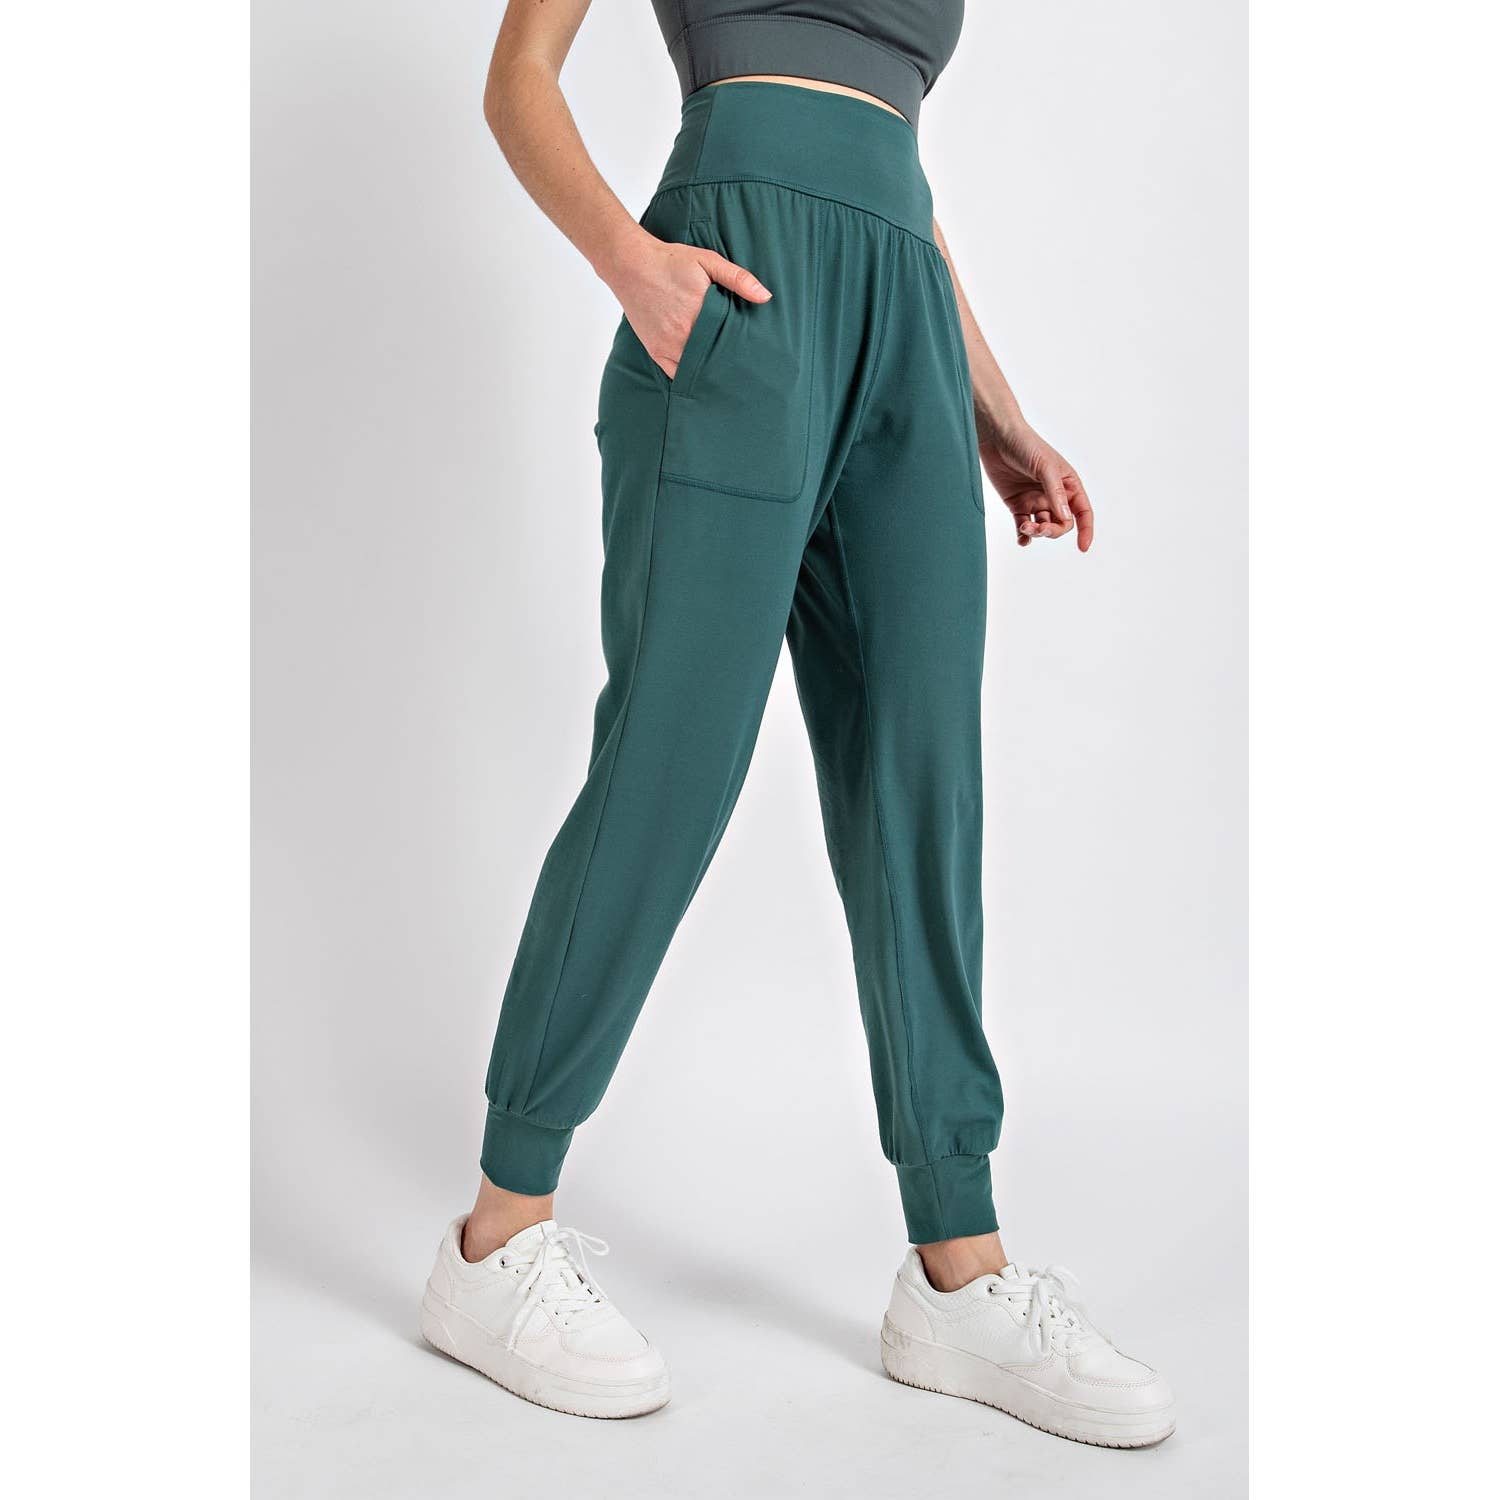 RM JOGGERS POCKETS French Press